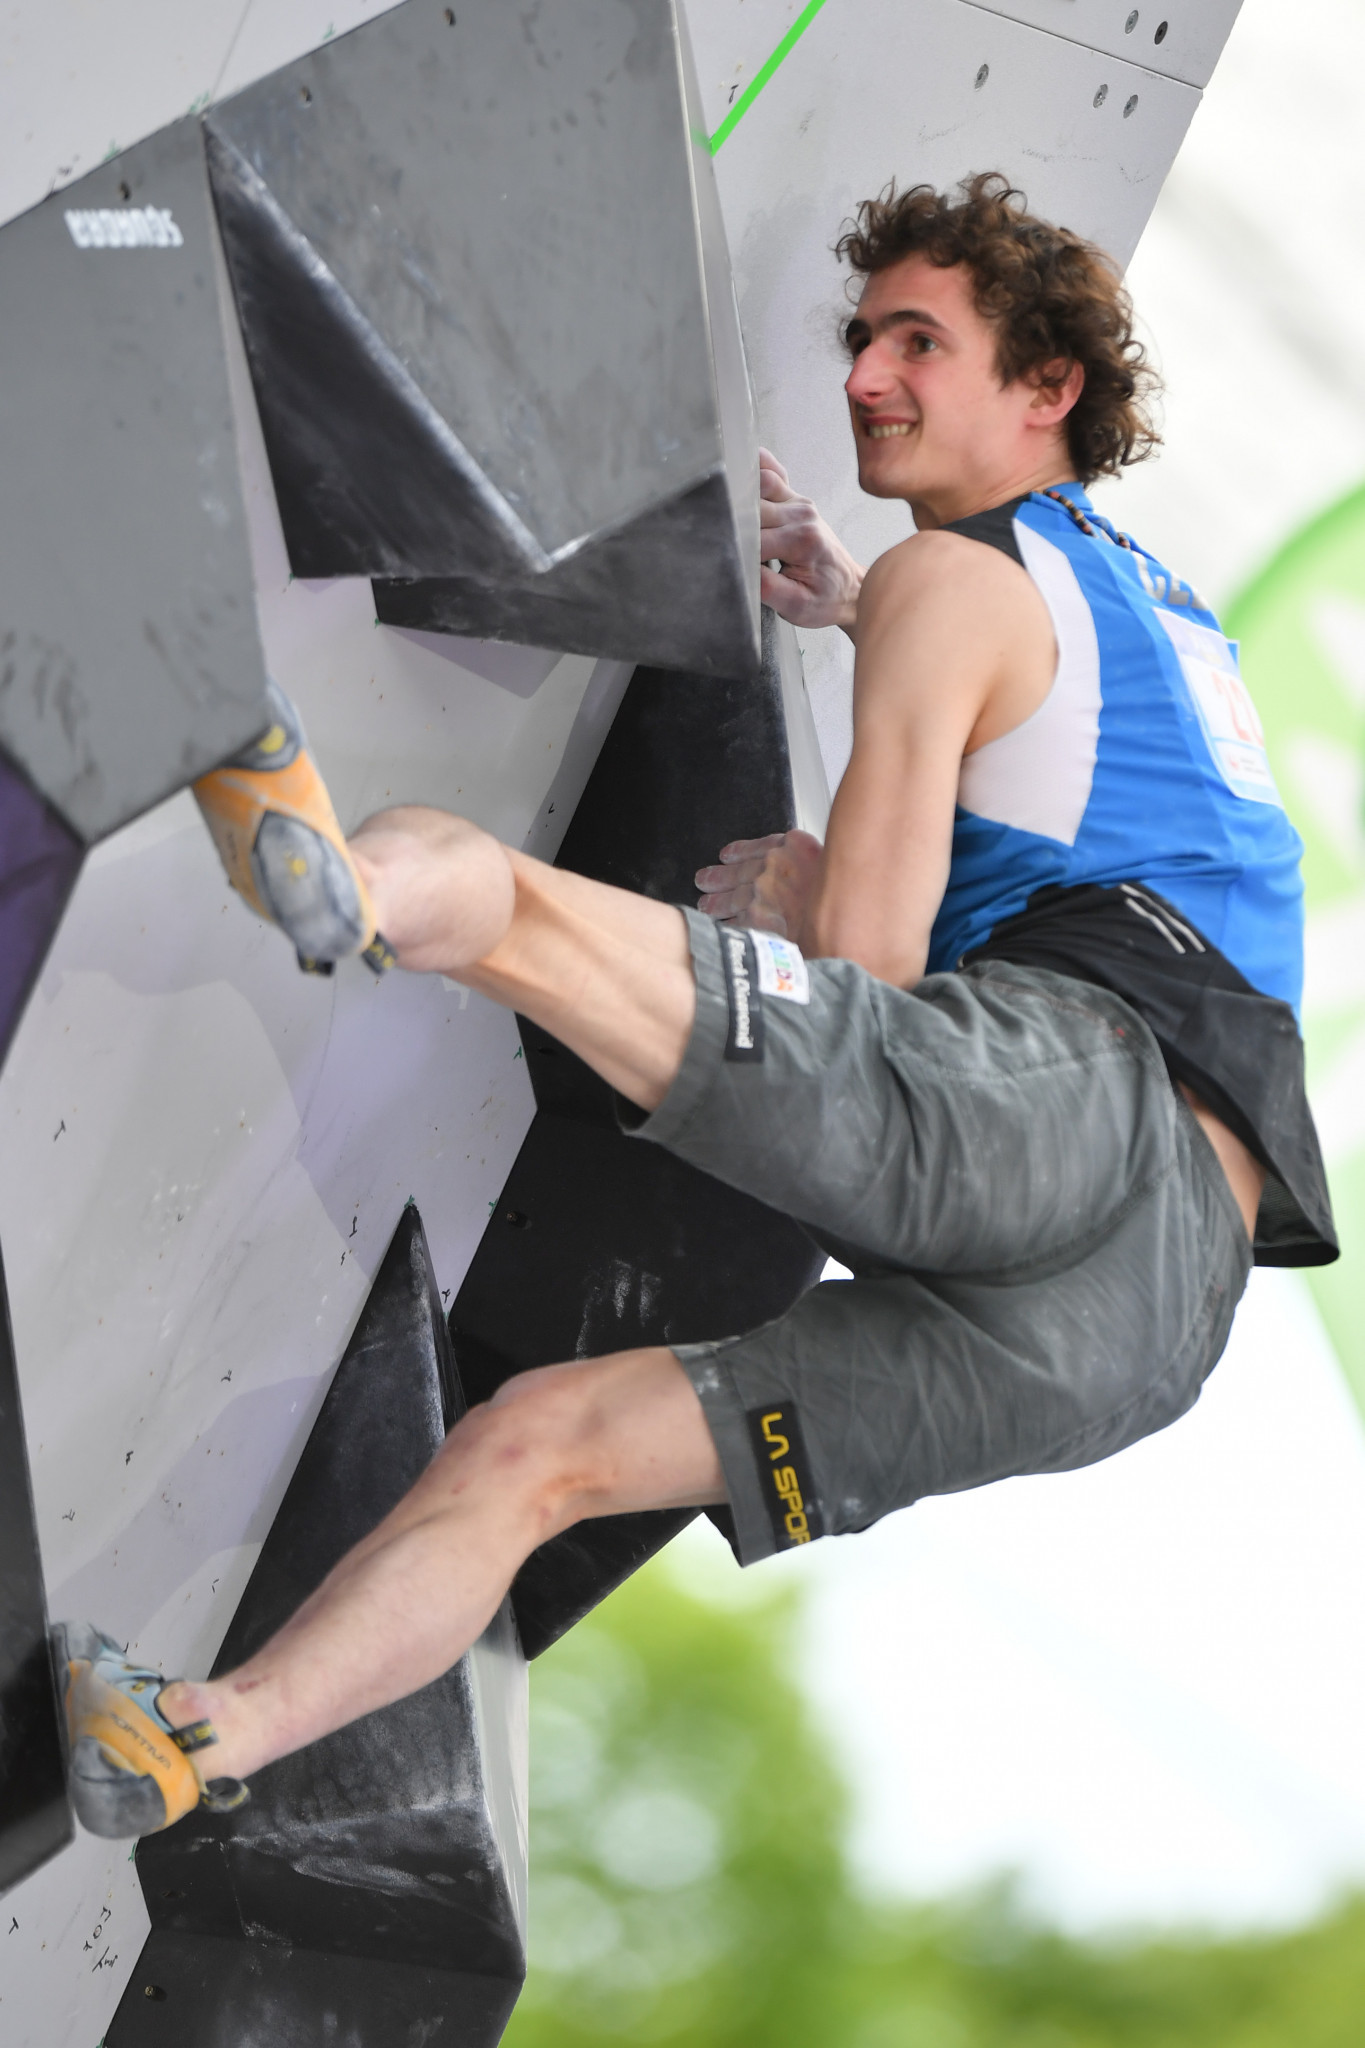 Czech Republic's Adam Ondra claimed the men's lead title as action continued today at the IFSC World Championships in Hachioji in Japan ©Getty Images